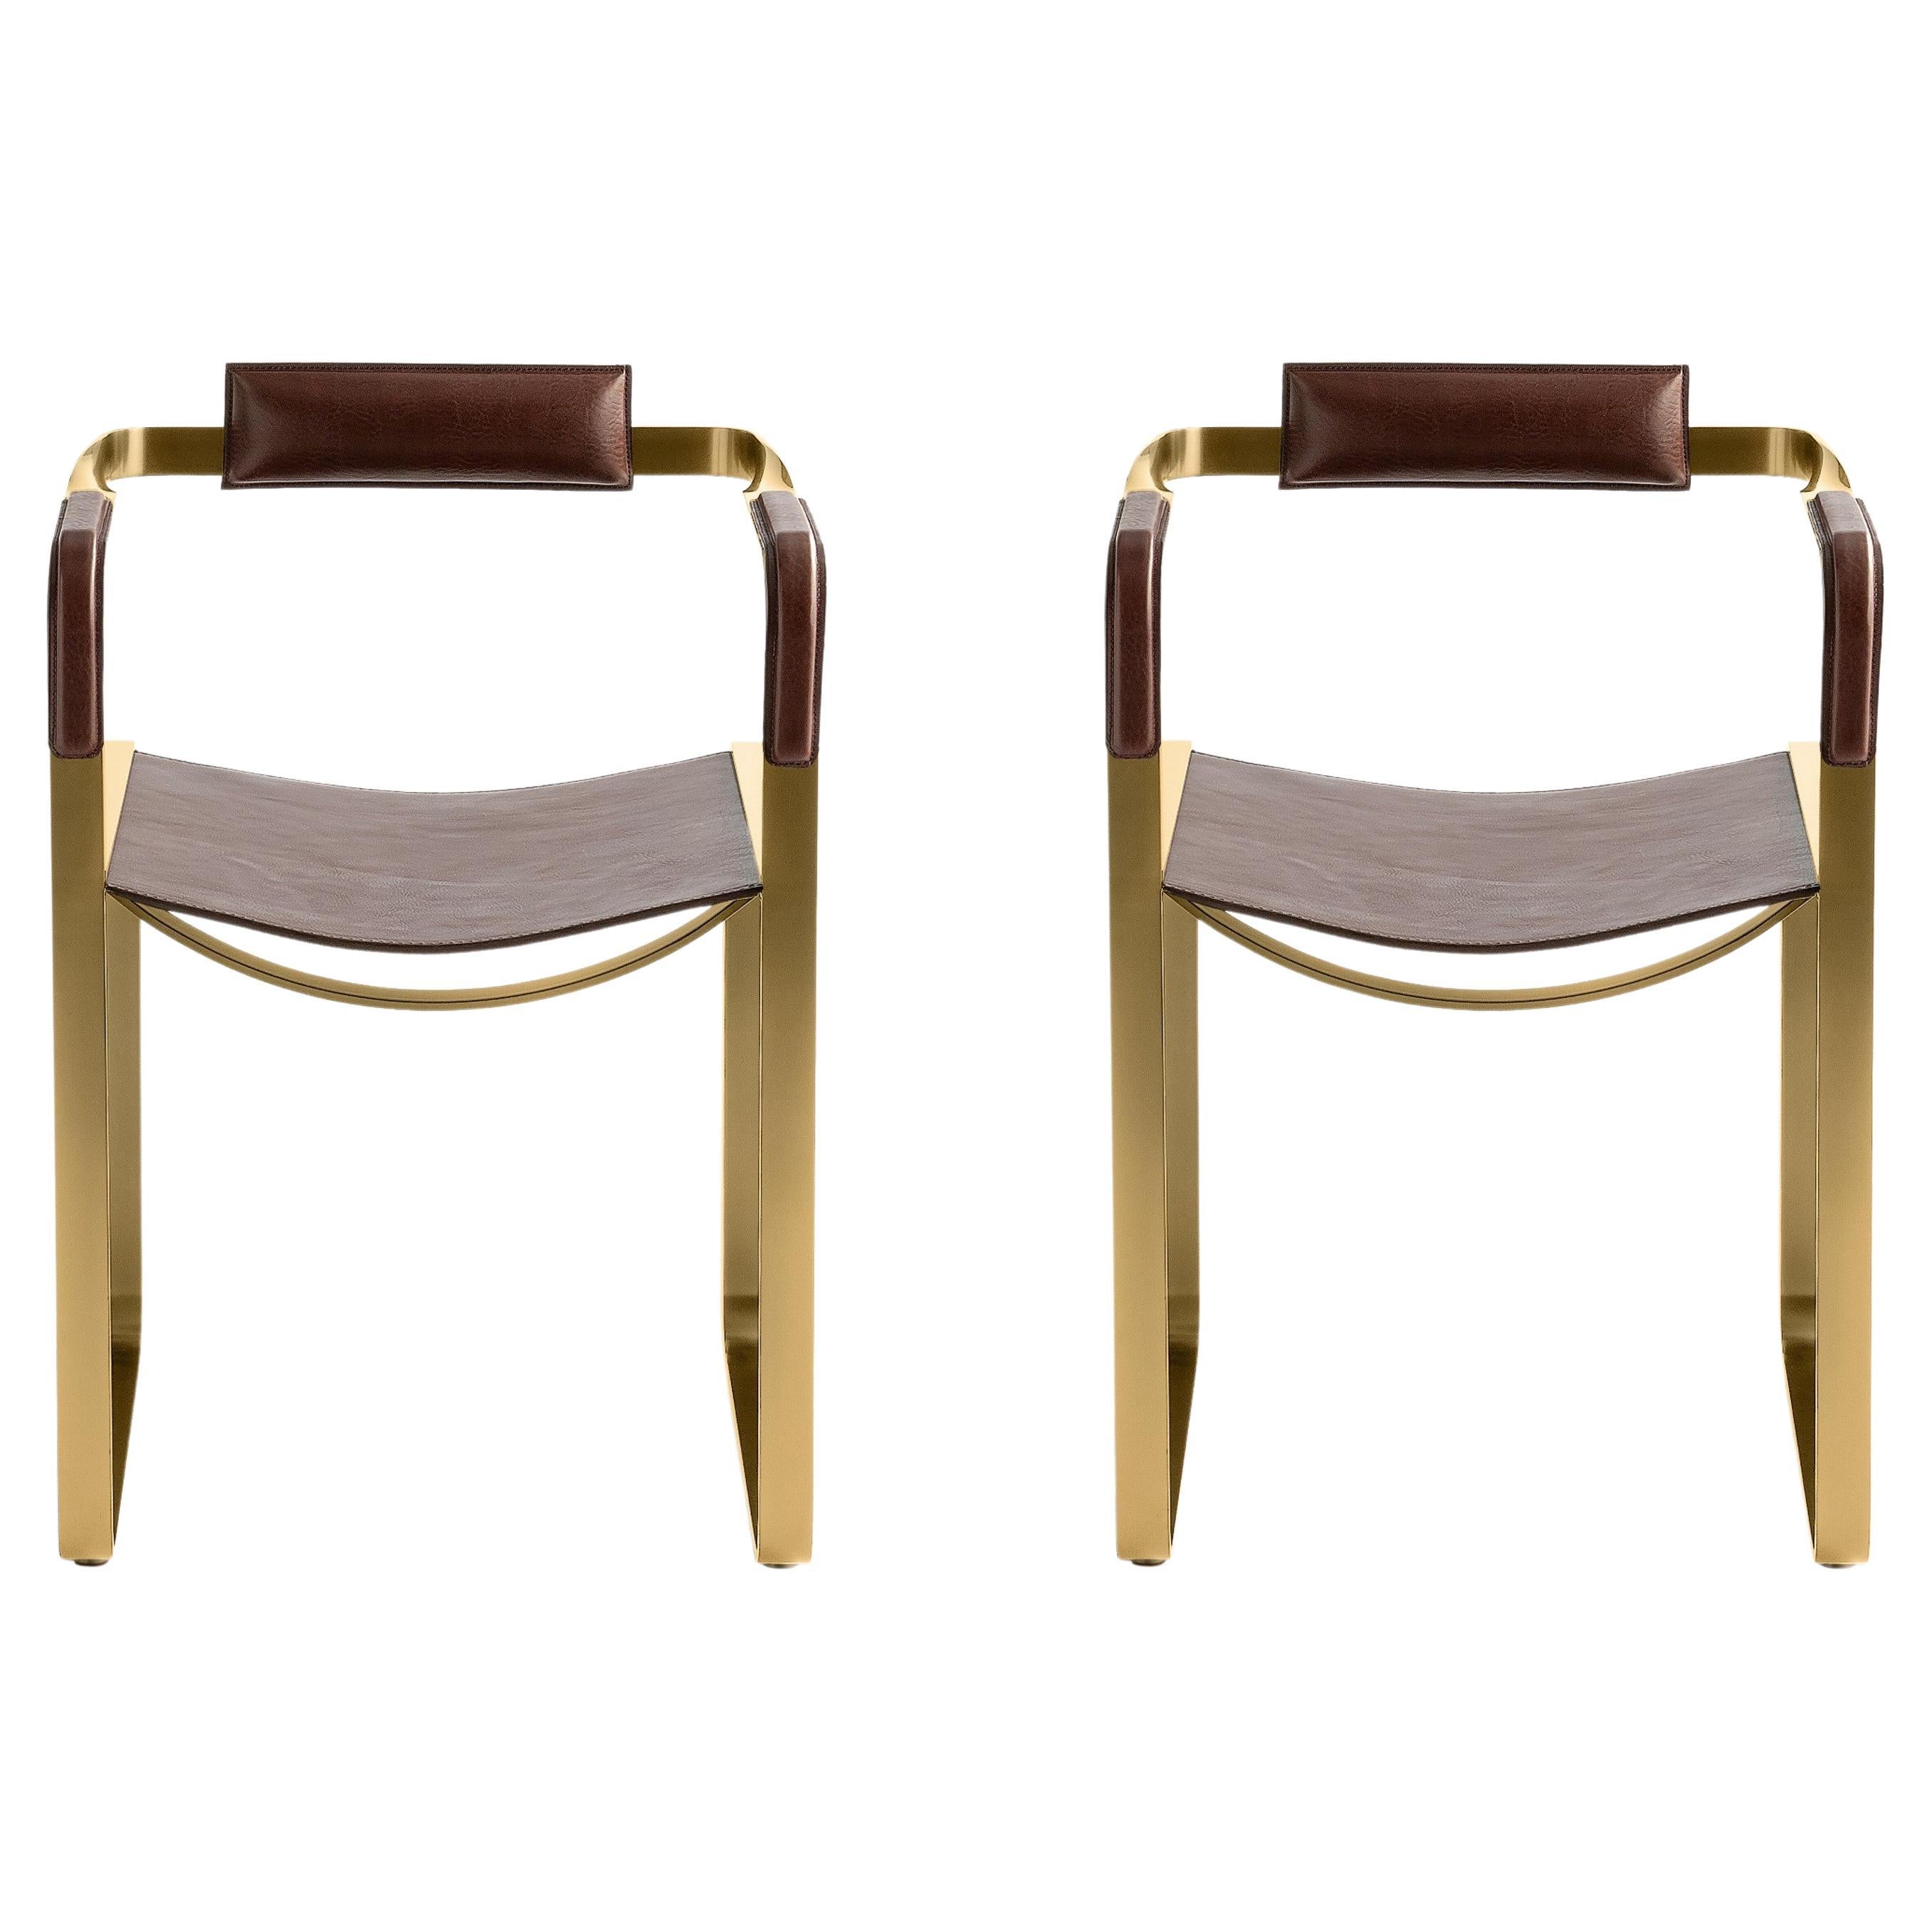 Set of 2 Armchair, Aged Brass Steel & Dark Brown Leather, Contemporary Style